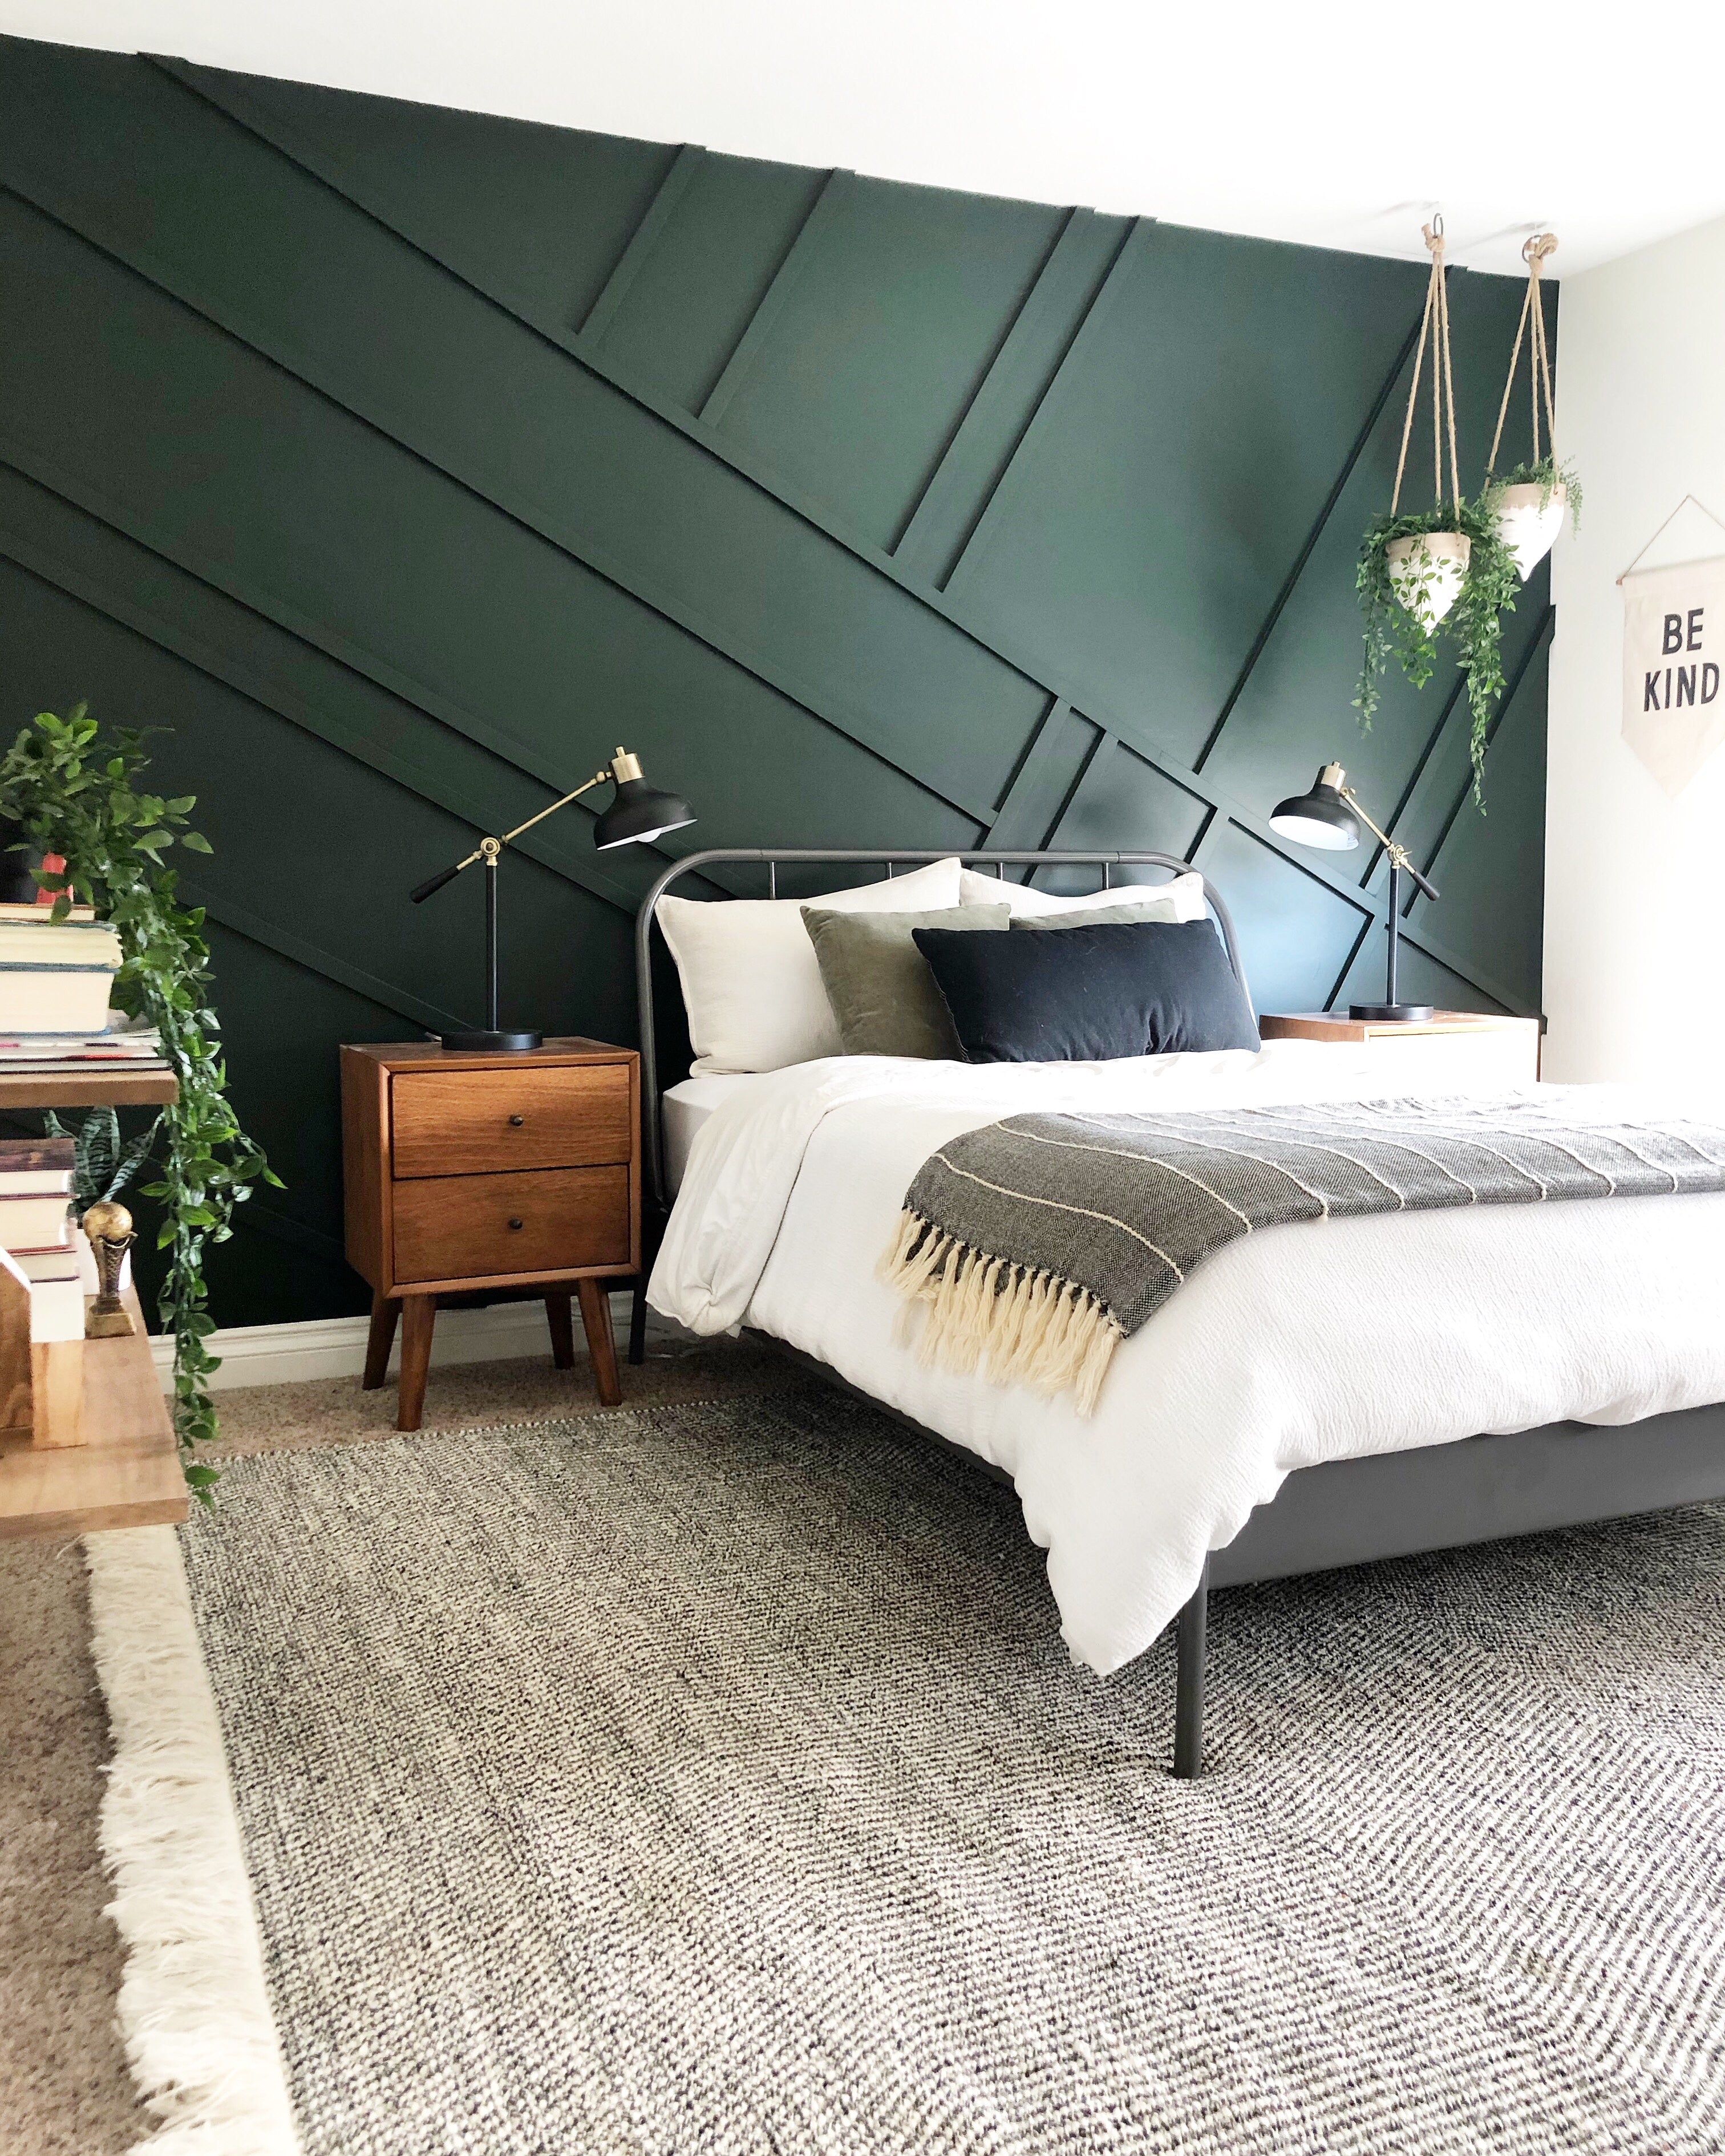 How to Decorate Your Bedroom - Design School Sunday - Sigrid & Co.